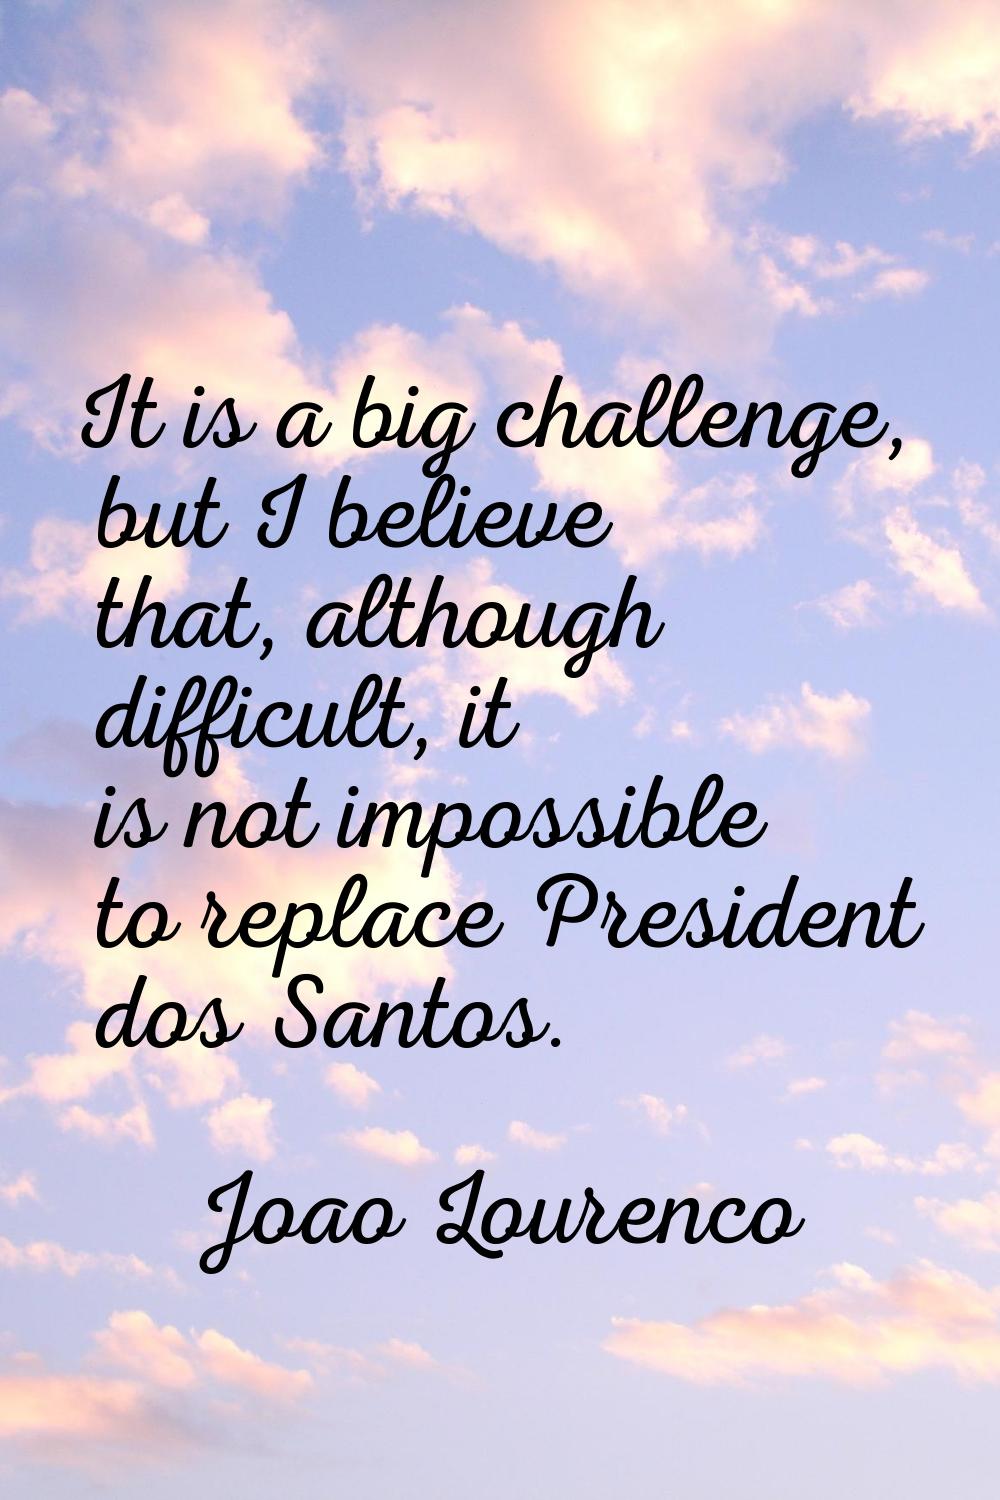 It is a big challenge, but I believe that, although difficult, it is not impossible to replace Pres